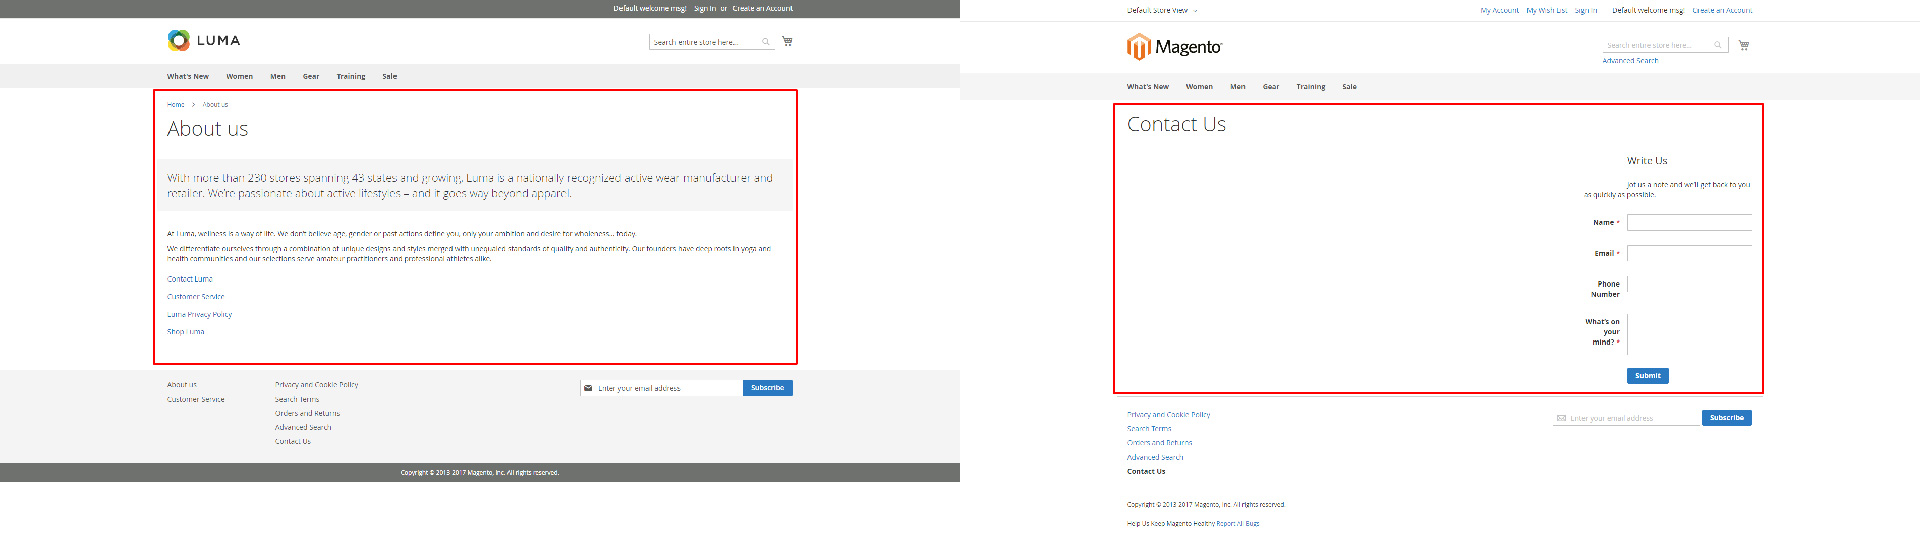 Magento 2 theme comparison Luma and Blank - About page